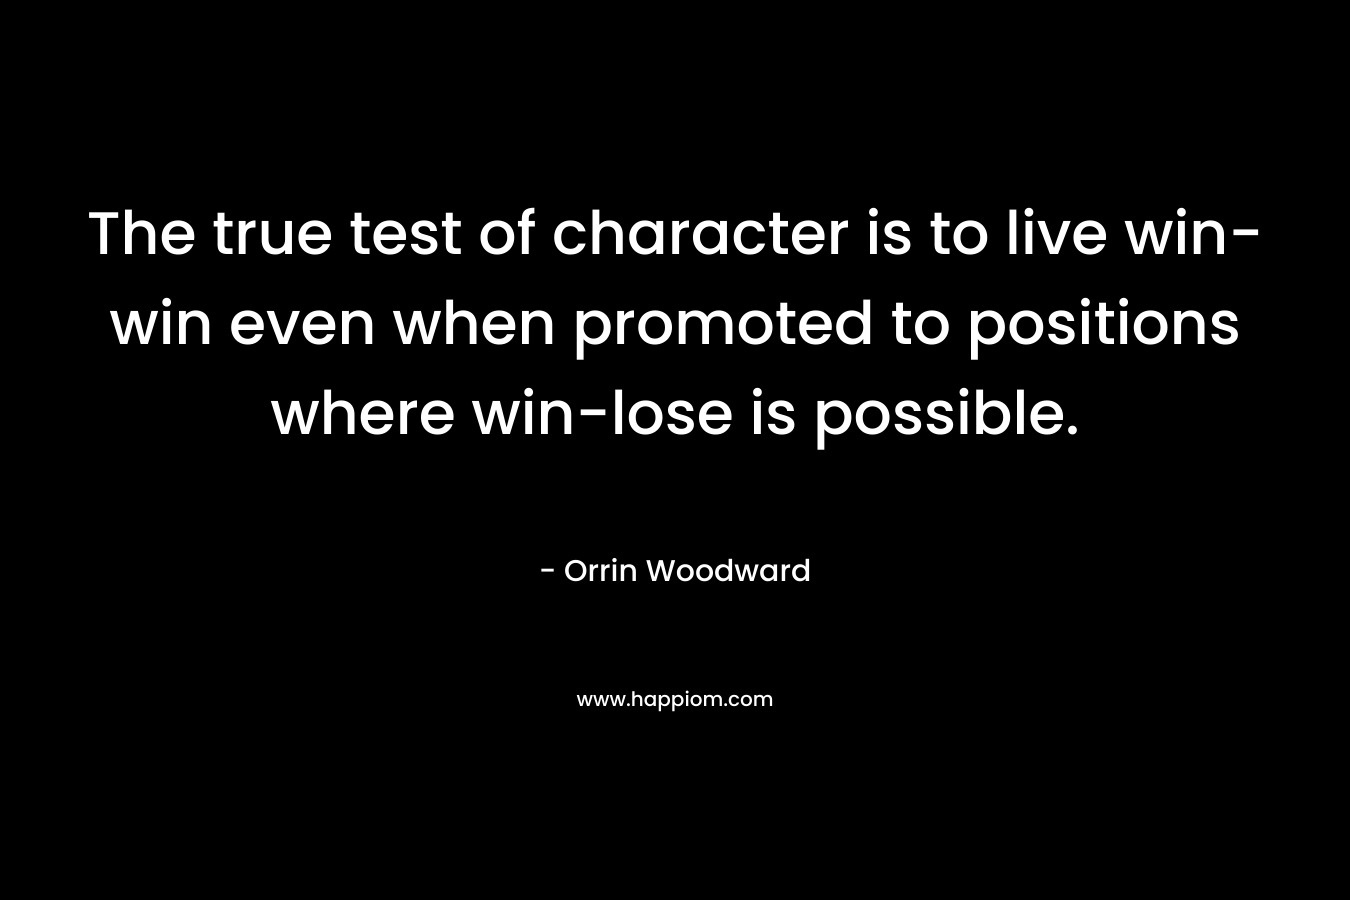 The true test of character is to live win-win even when promoted to positions where win-lose is possible.